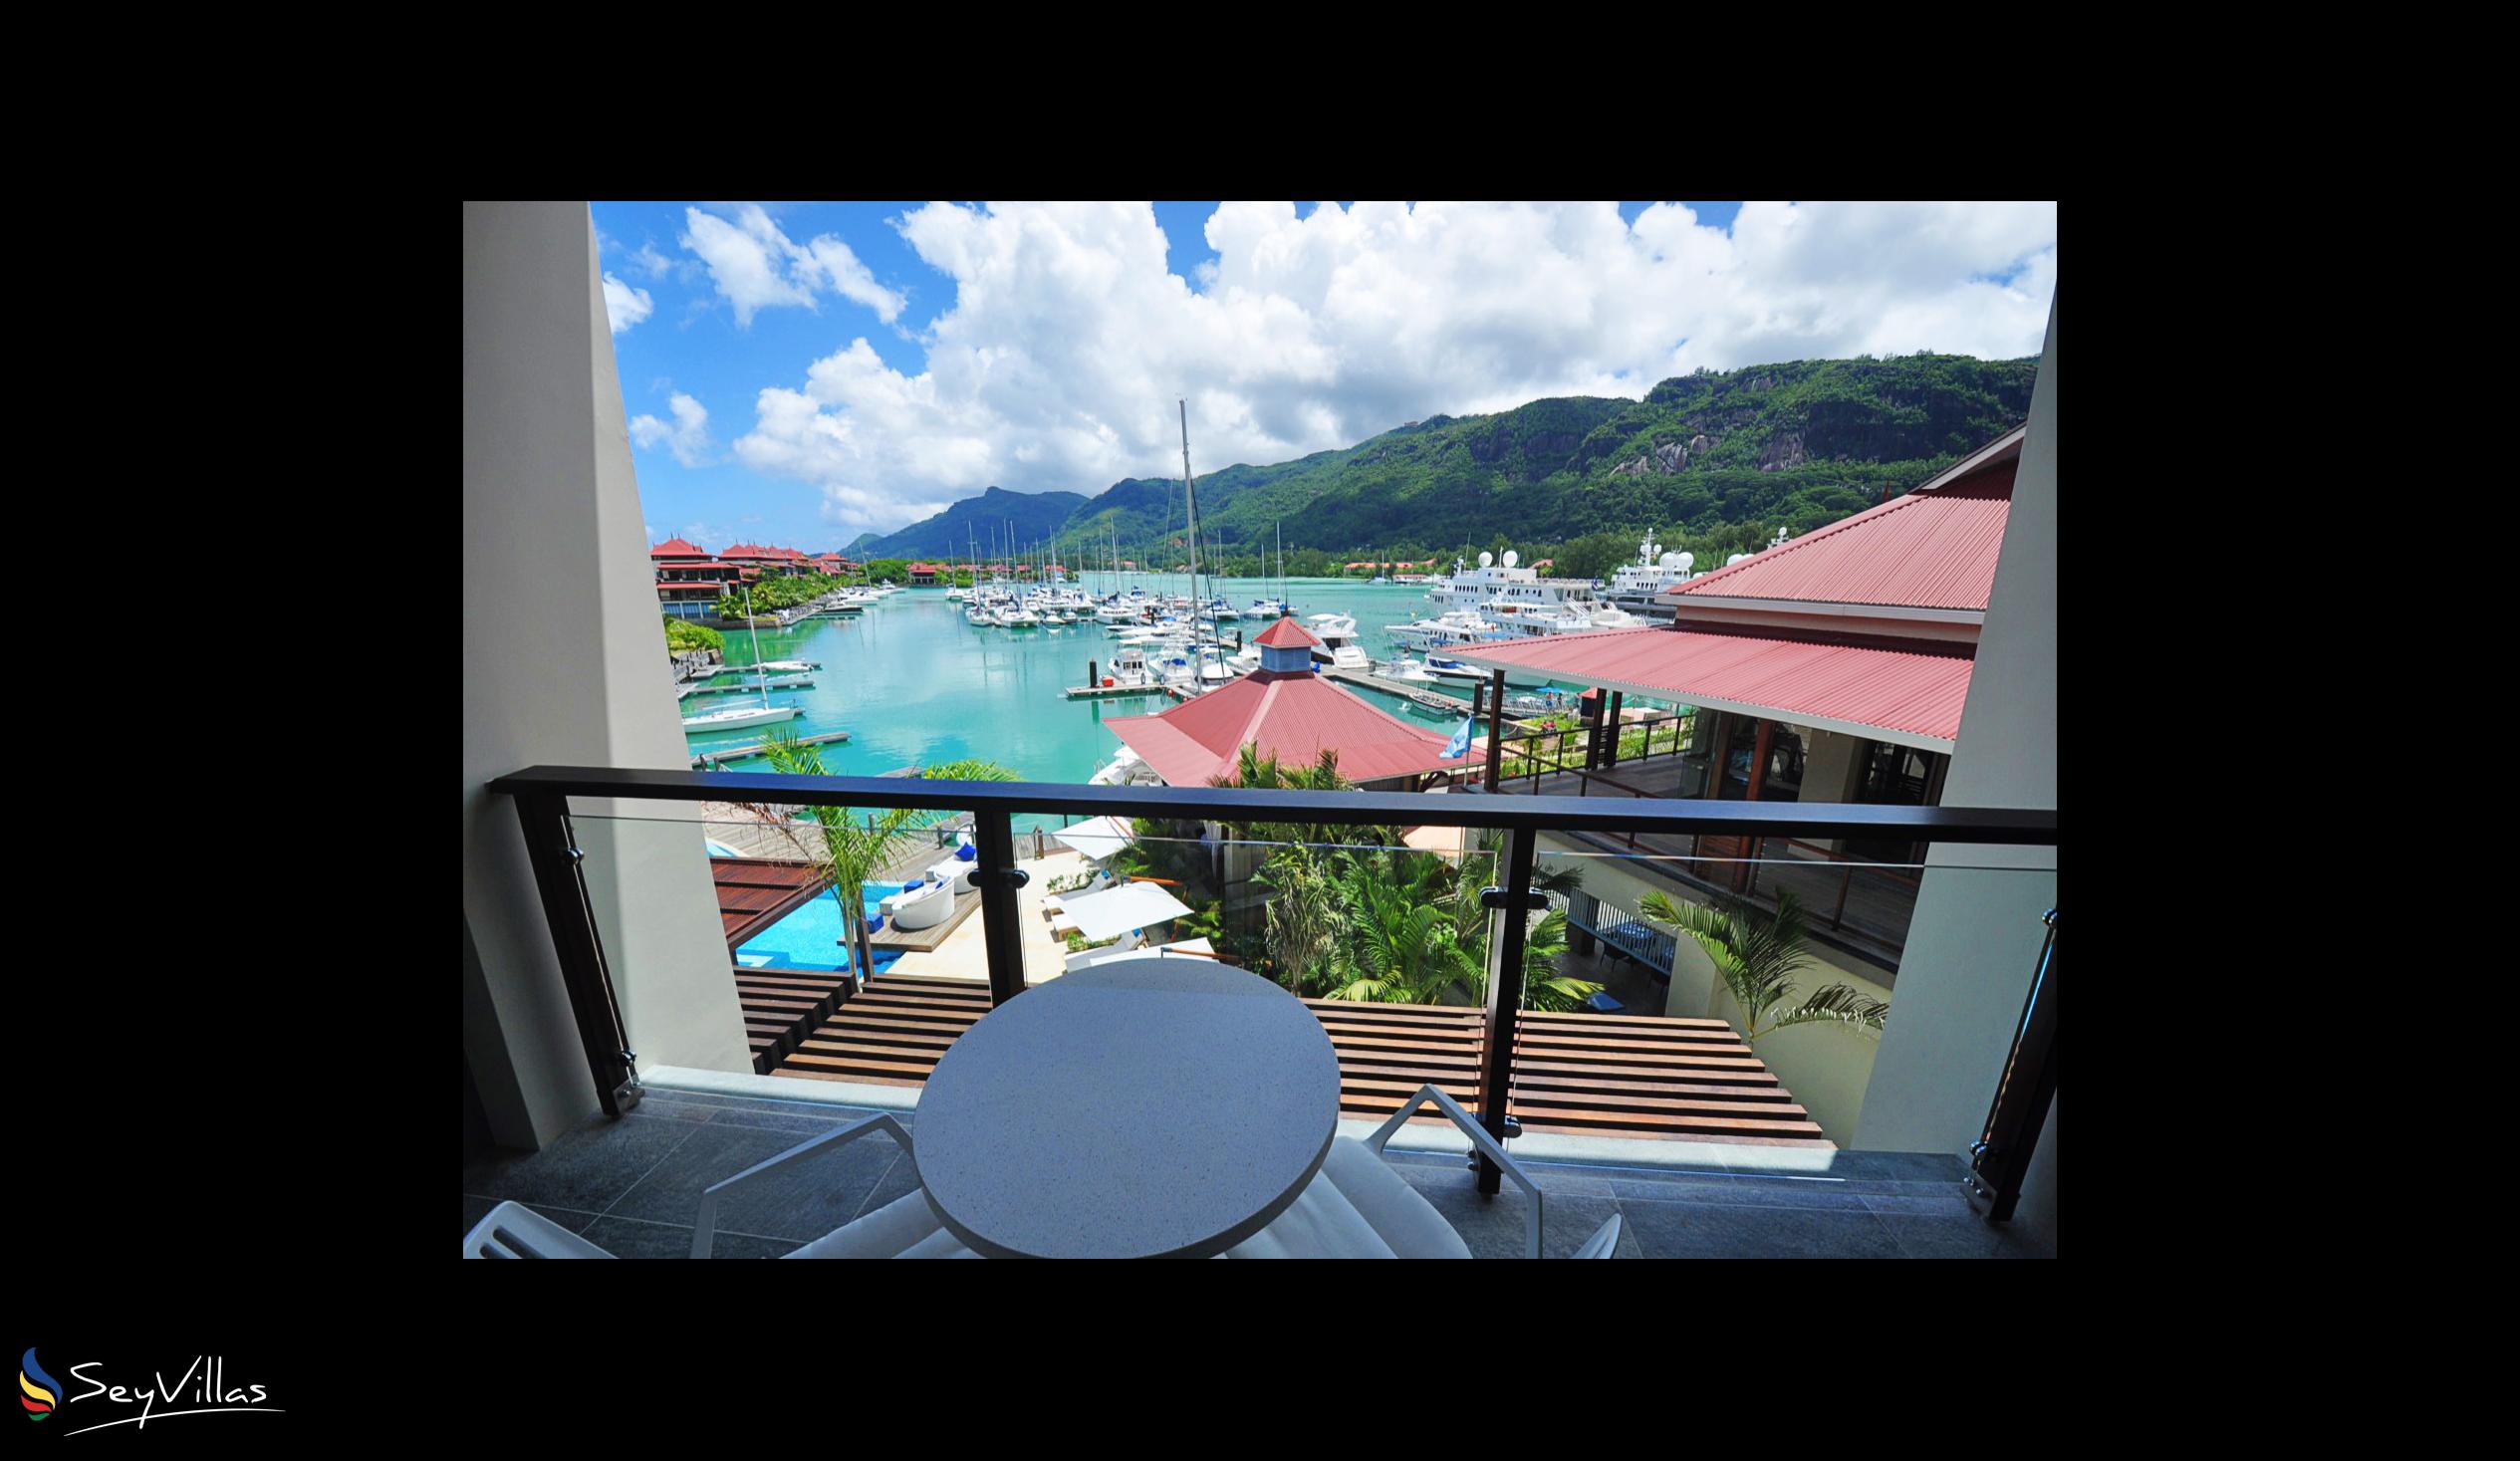 Photo 37: Eden Bleu Hotel - Deluxe Room with Marina View - Mahé (Seychelles)